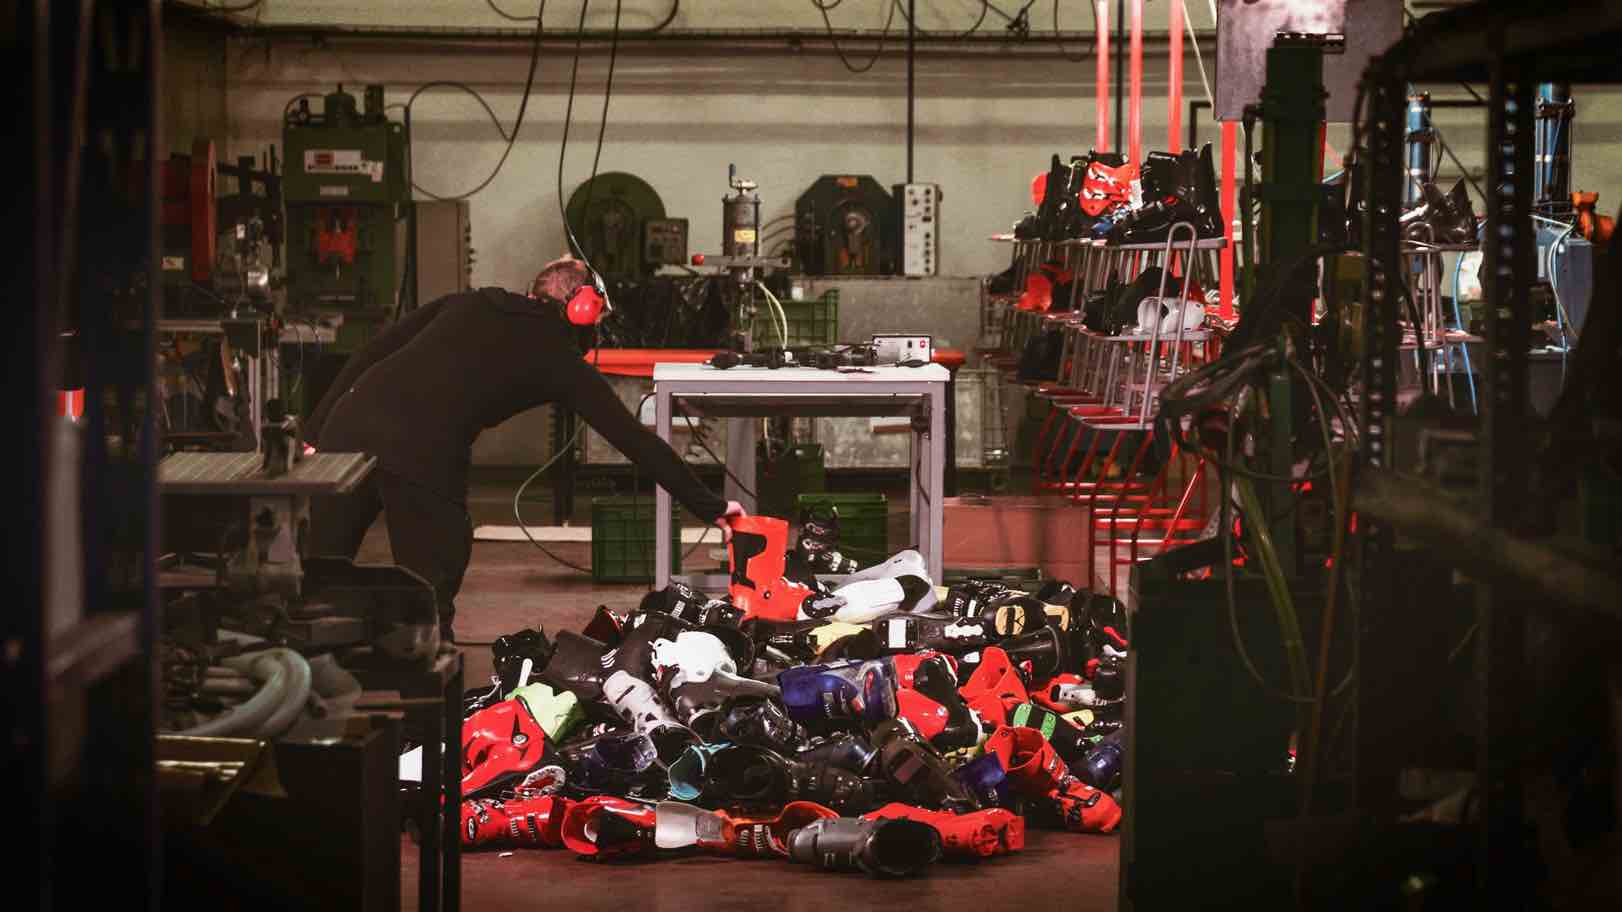 Ski Stores Recommend More Gear Recycling in 2023